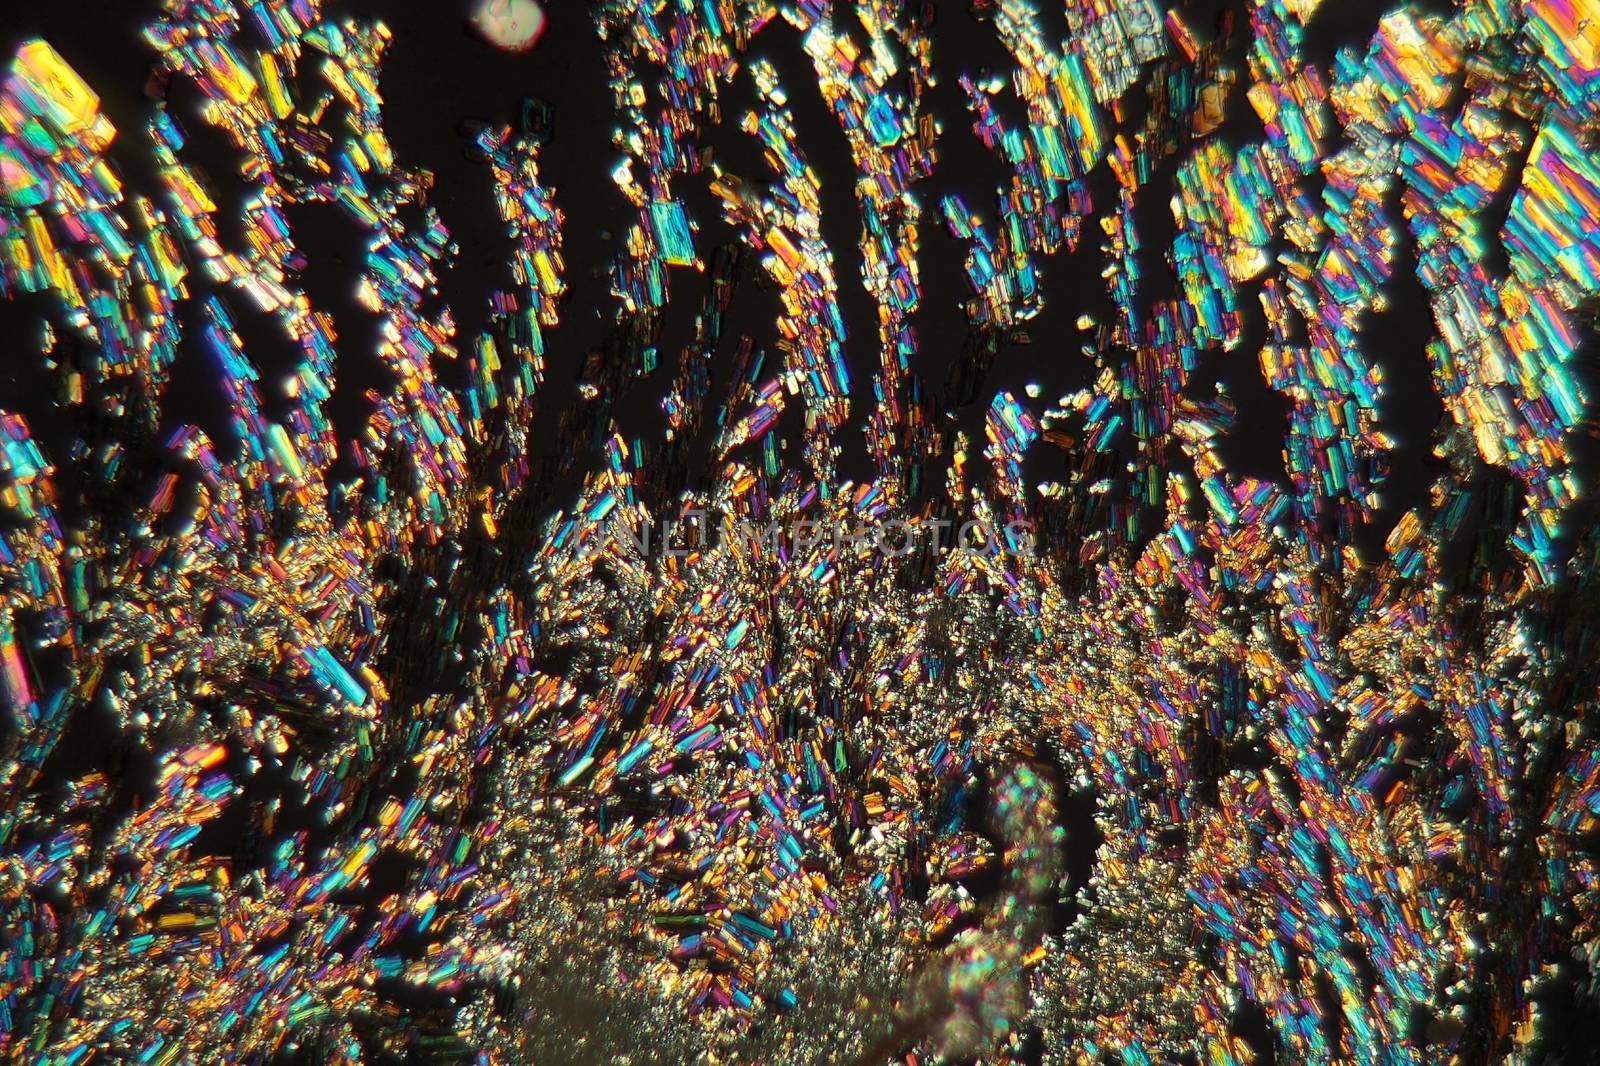 Alanine is a amino acid which occurs in the human body. The photo is made with a magnification of 100x and in polarized light. The sample is pure Alanine precipitated from a solution on a microscope slide.